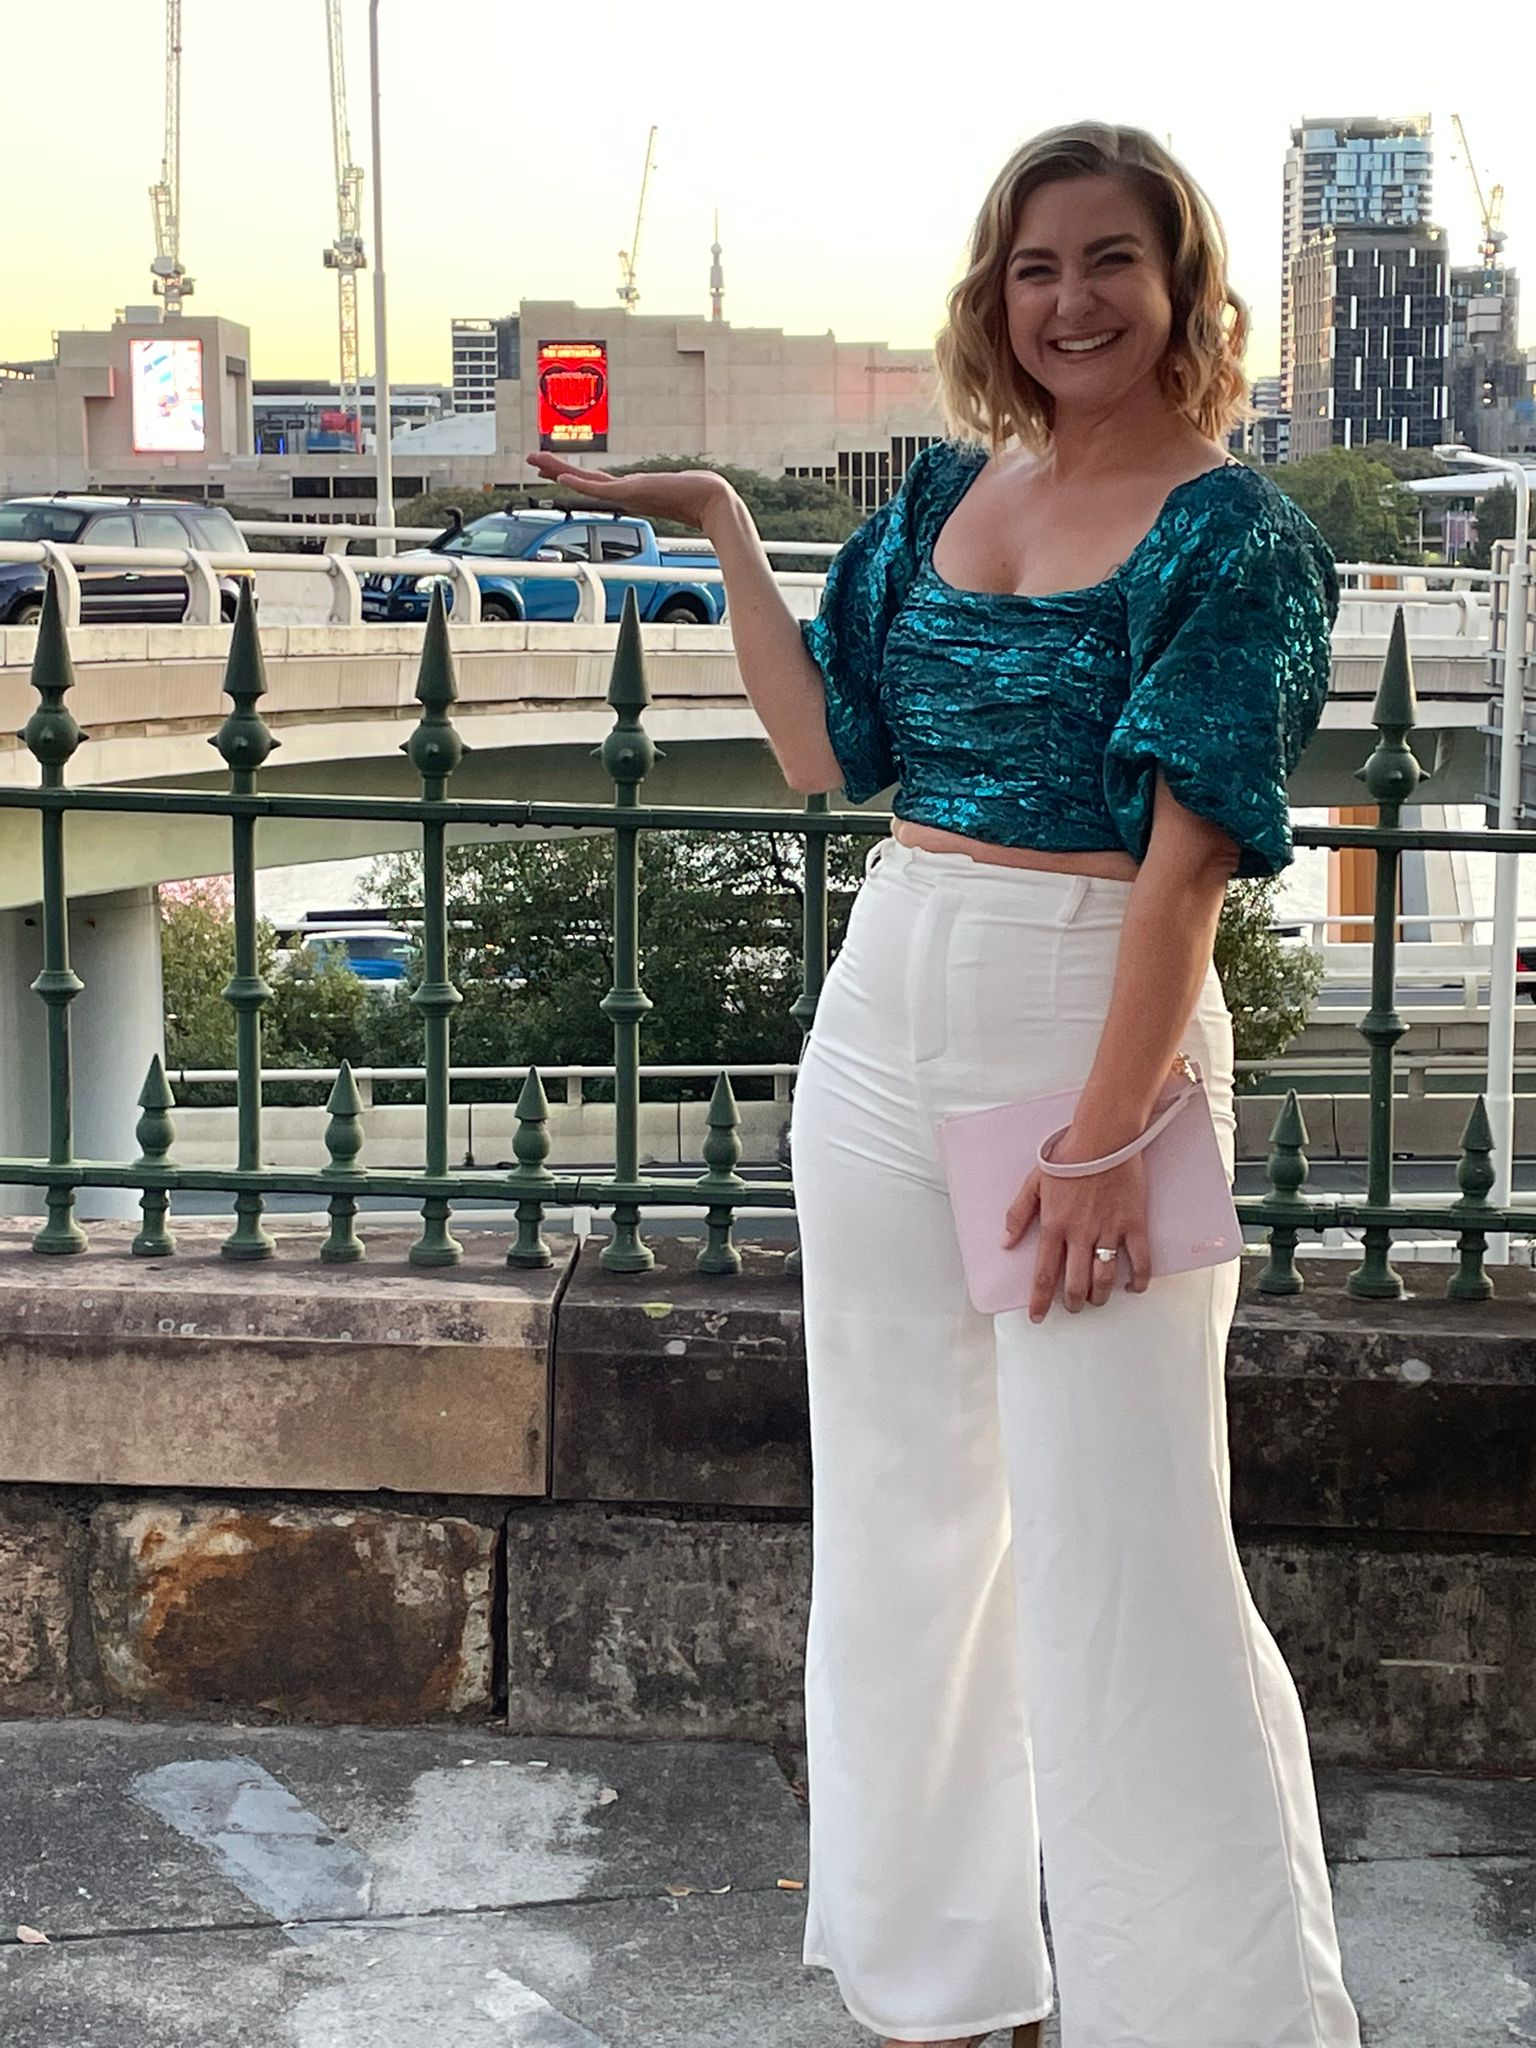 mum-smiling-in-city-wearing-second-hand-clothes